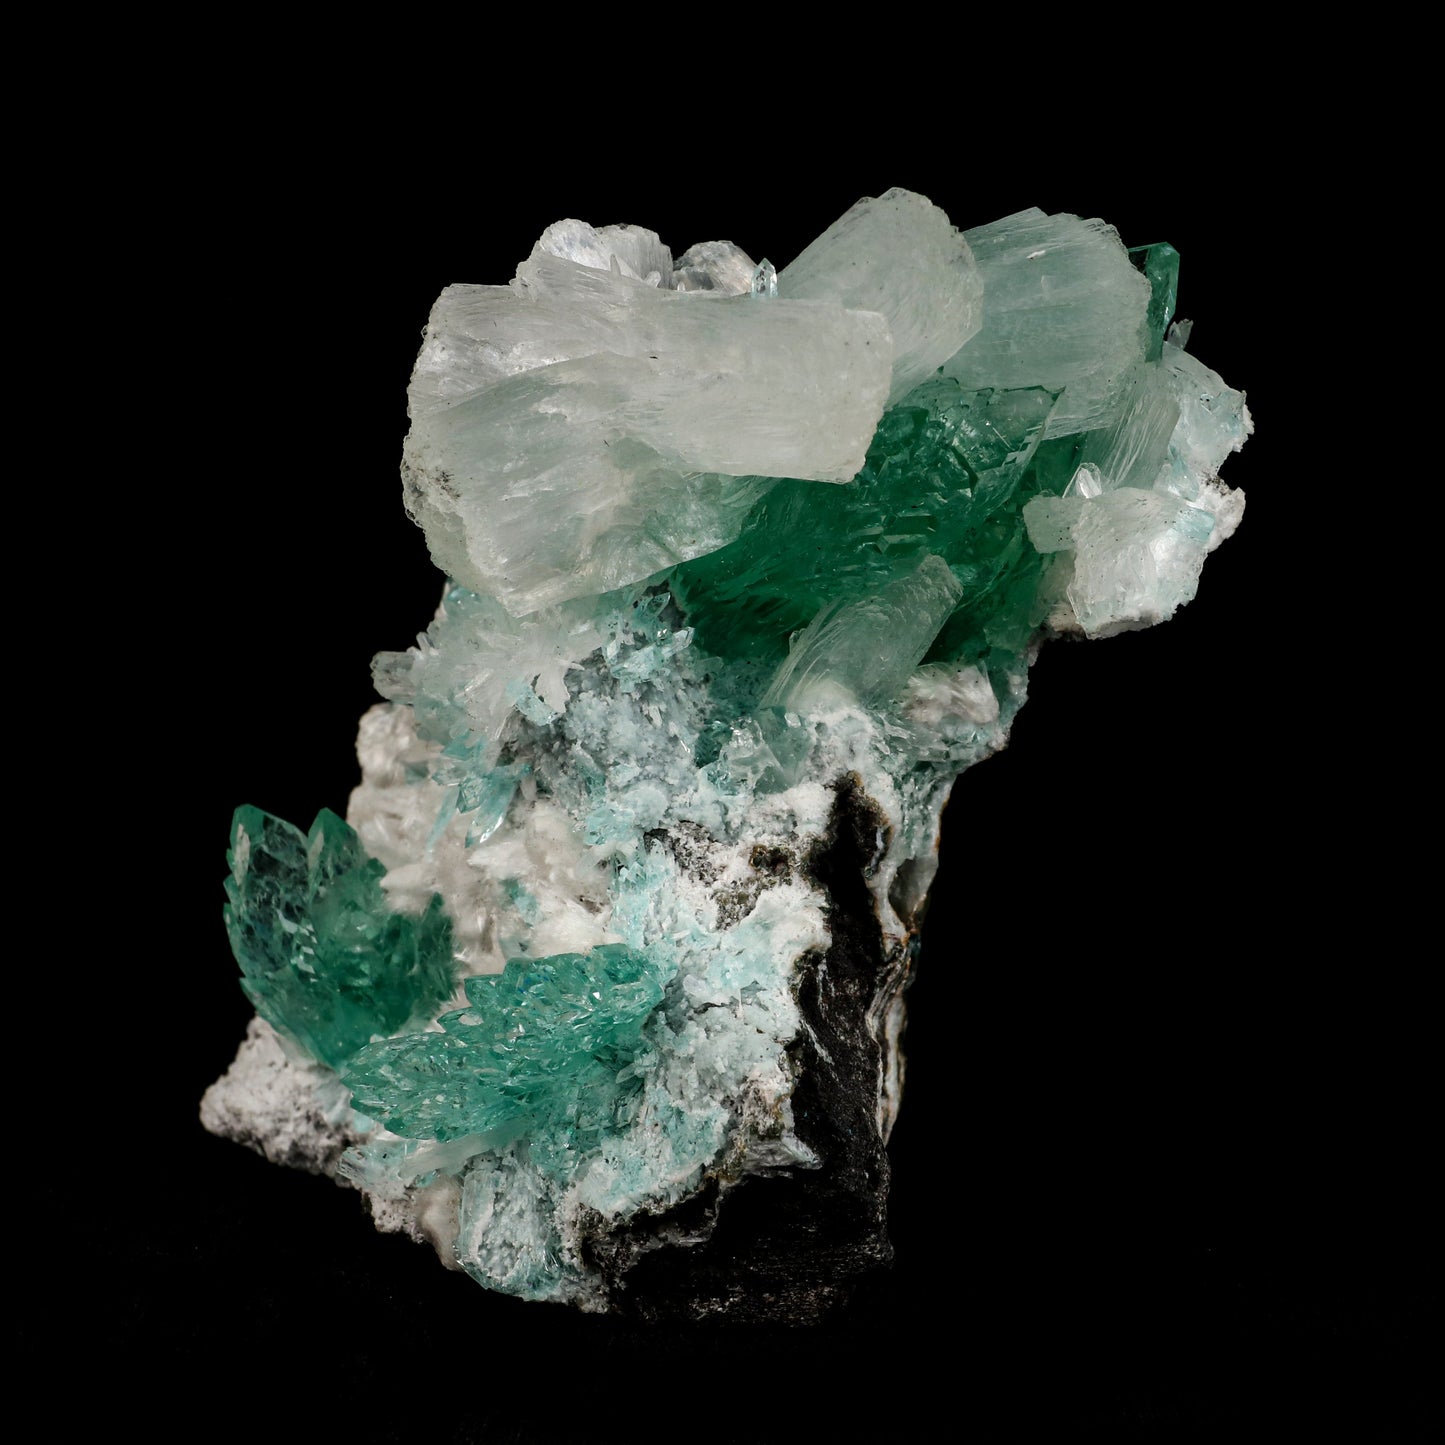 Green Fluorapophyllite and Stilbite Natural Mineral Specimen # B 507…  https://www.superbminerals.us/products/green-apophyllite-with-stilbite-natural-mineral-specimen-b-5070  Features: A fine oldtimer from theQuarry of the style of some of the earliest gem apophyllites that came out, totally unique in style and unequaled today! On a basaltic matrix are rosette-like clusters of glassy and gemmy, mint-green fluorapophyllite, to&nbsp; in length. Several doubly terminated, lustrous 